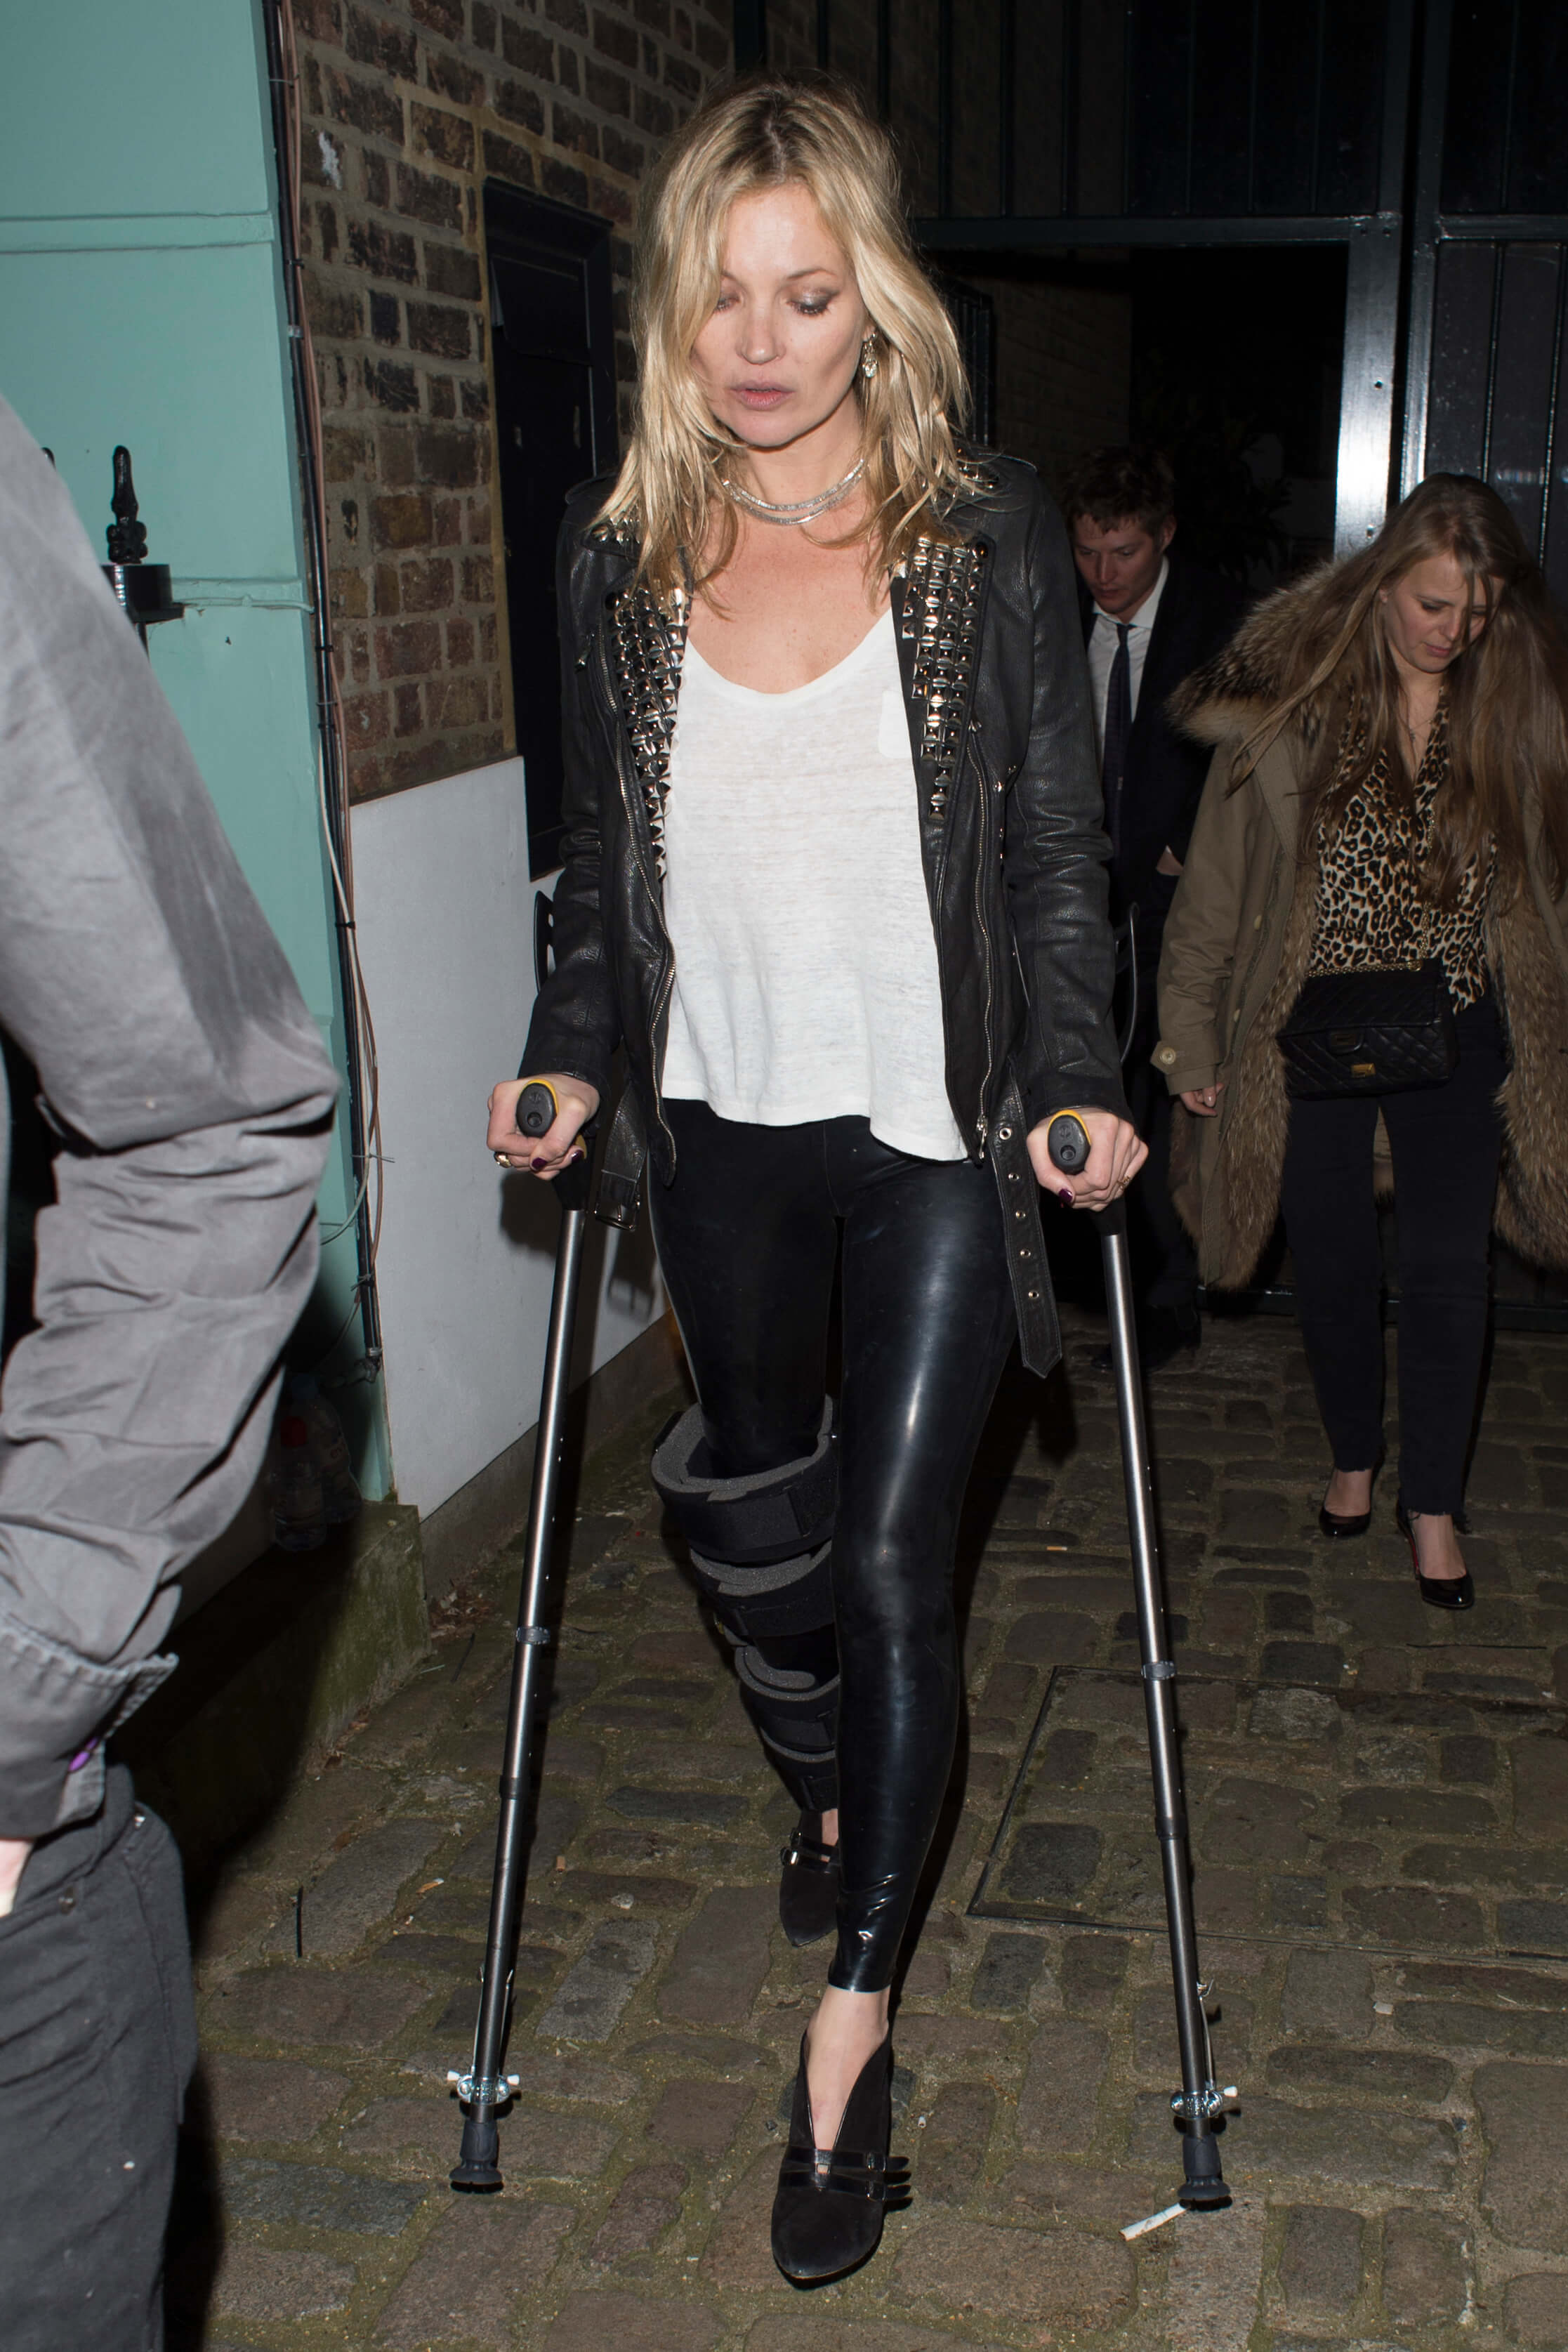 Kate Moss attends a London Fashion Week private afterparty